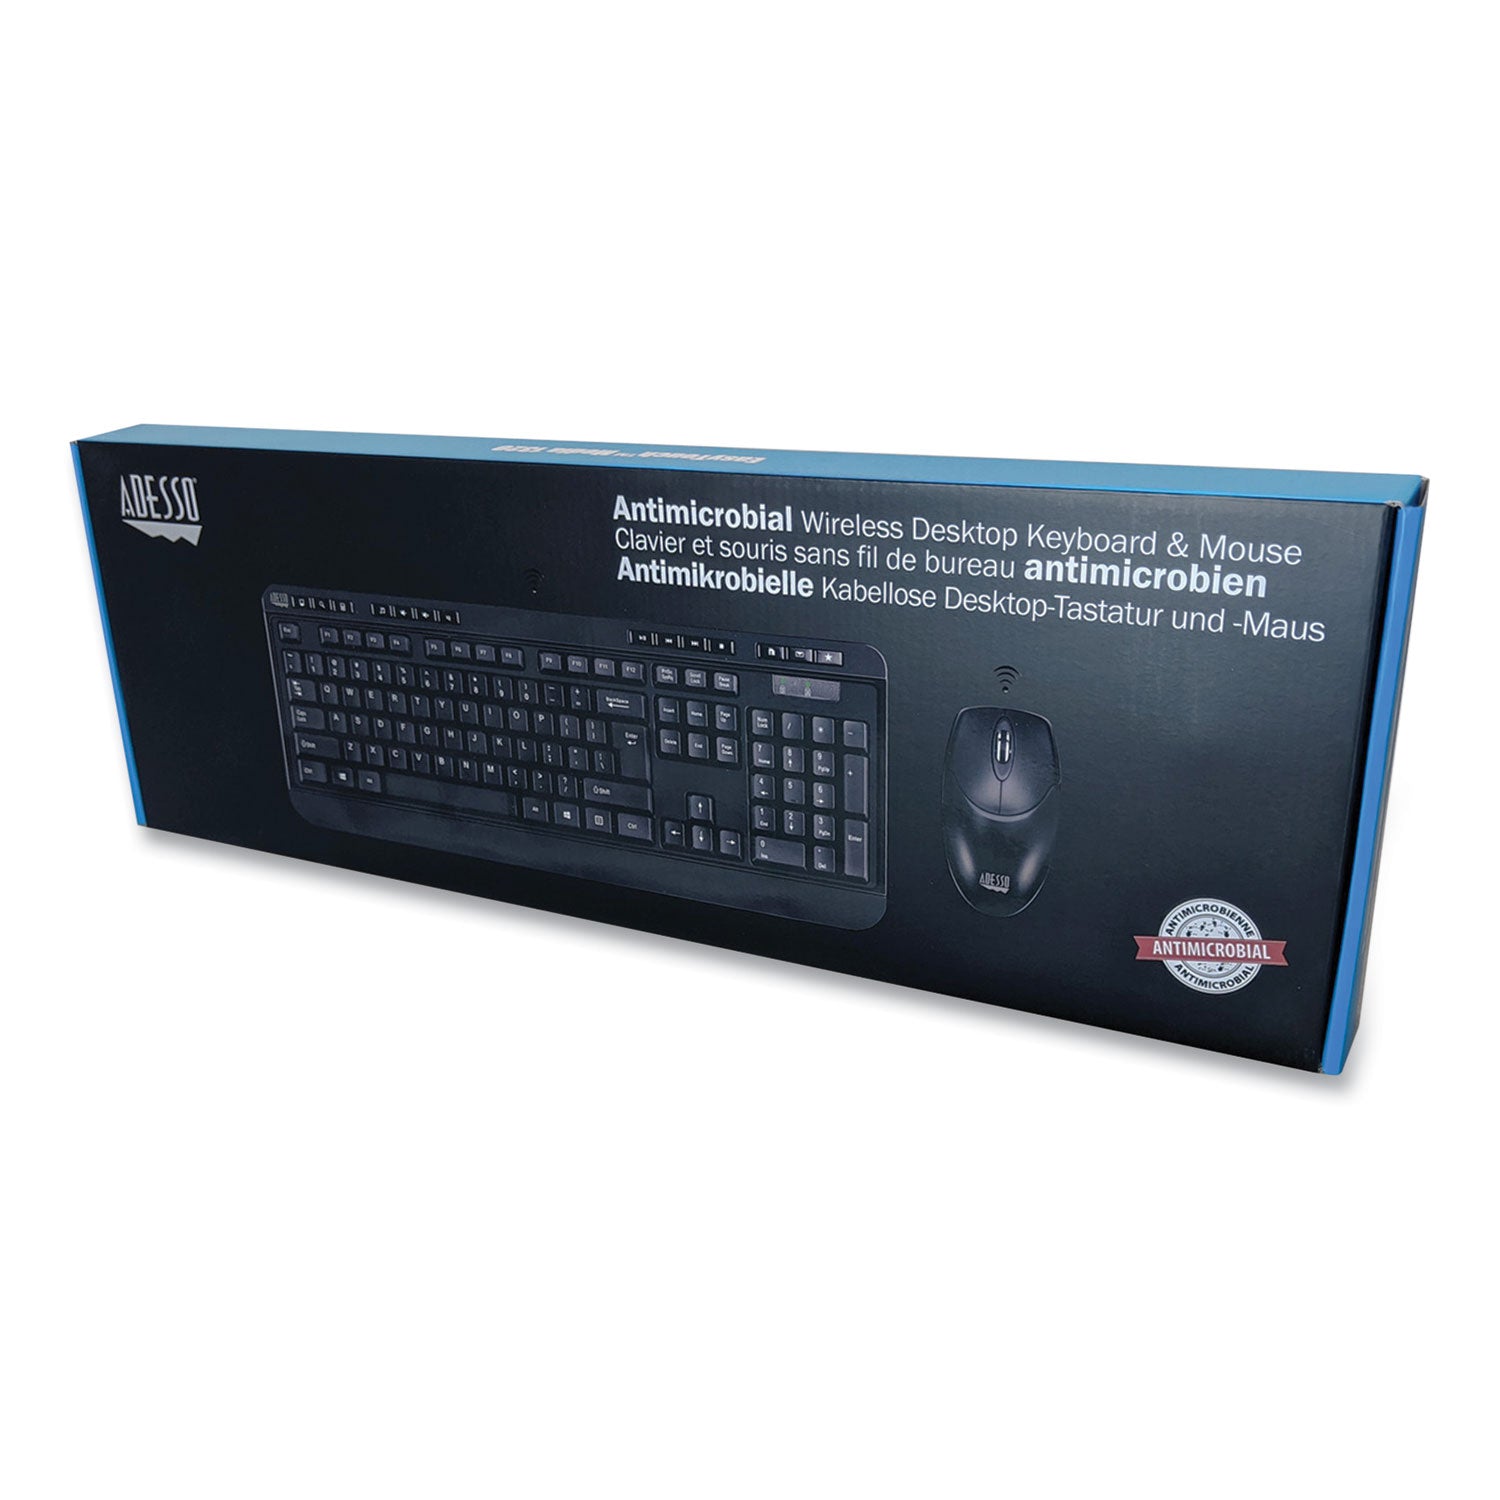 wkb-1320cb-antimicrobial-wireless-desktop-keyboard-and-mouse-24-ghz-frequency-30-ft-wireless-range-black_adewkb1320cb - 1